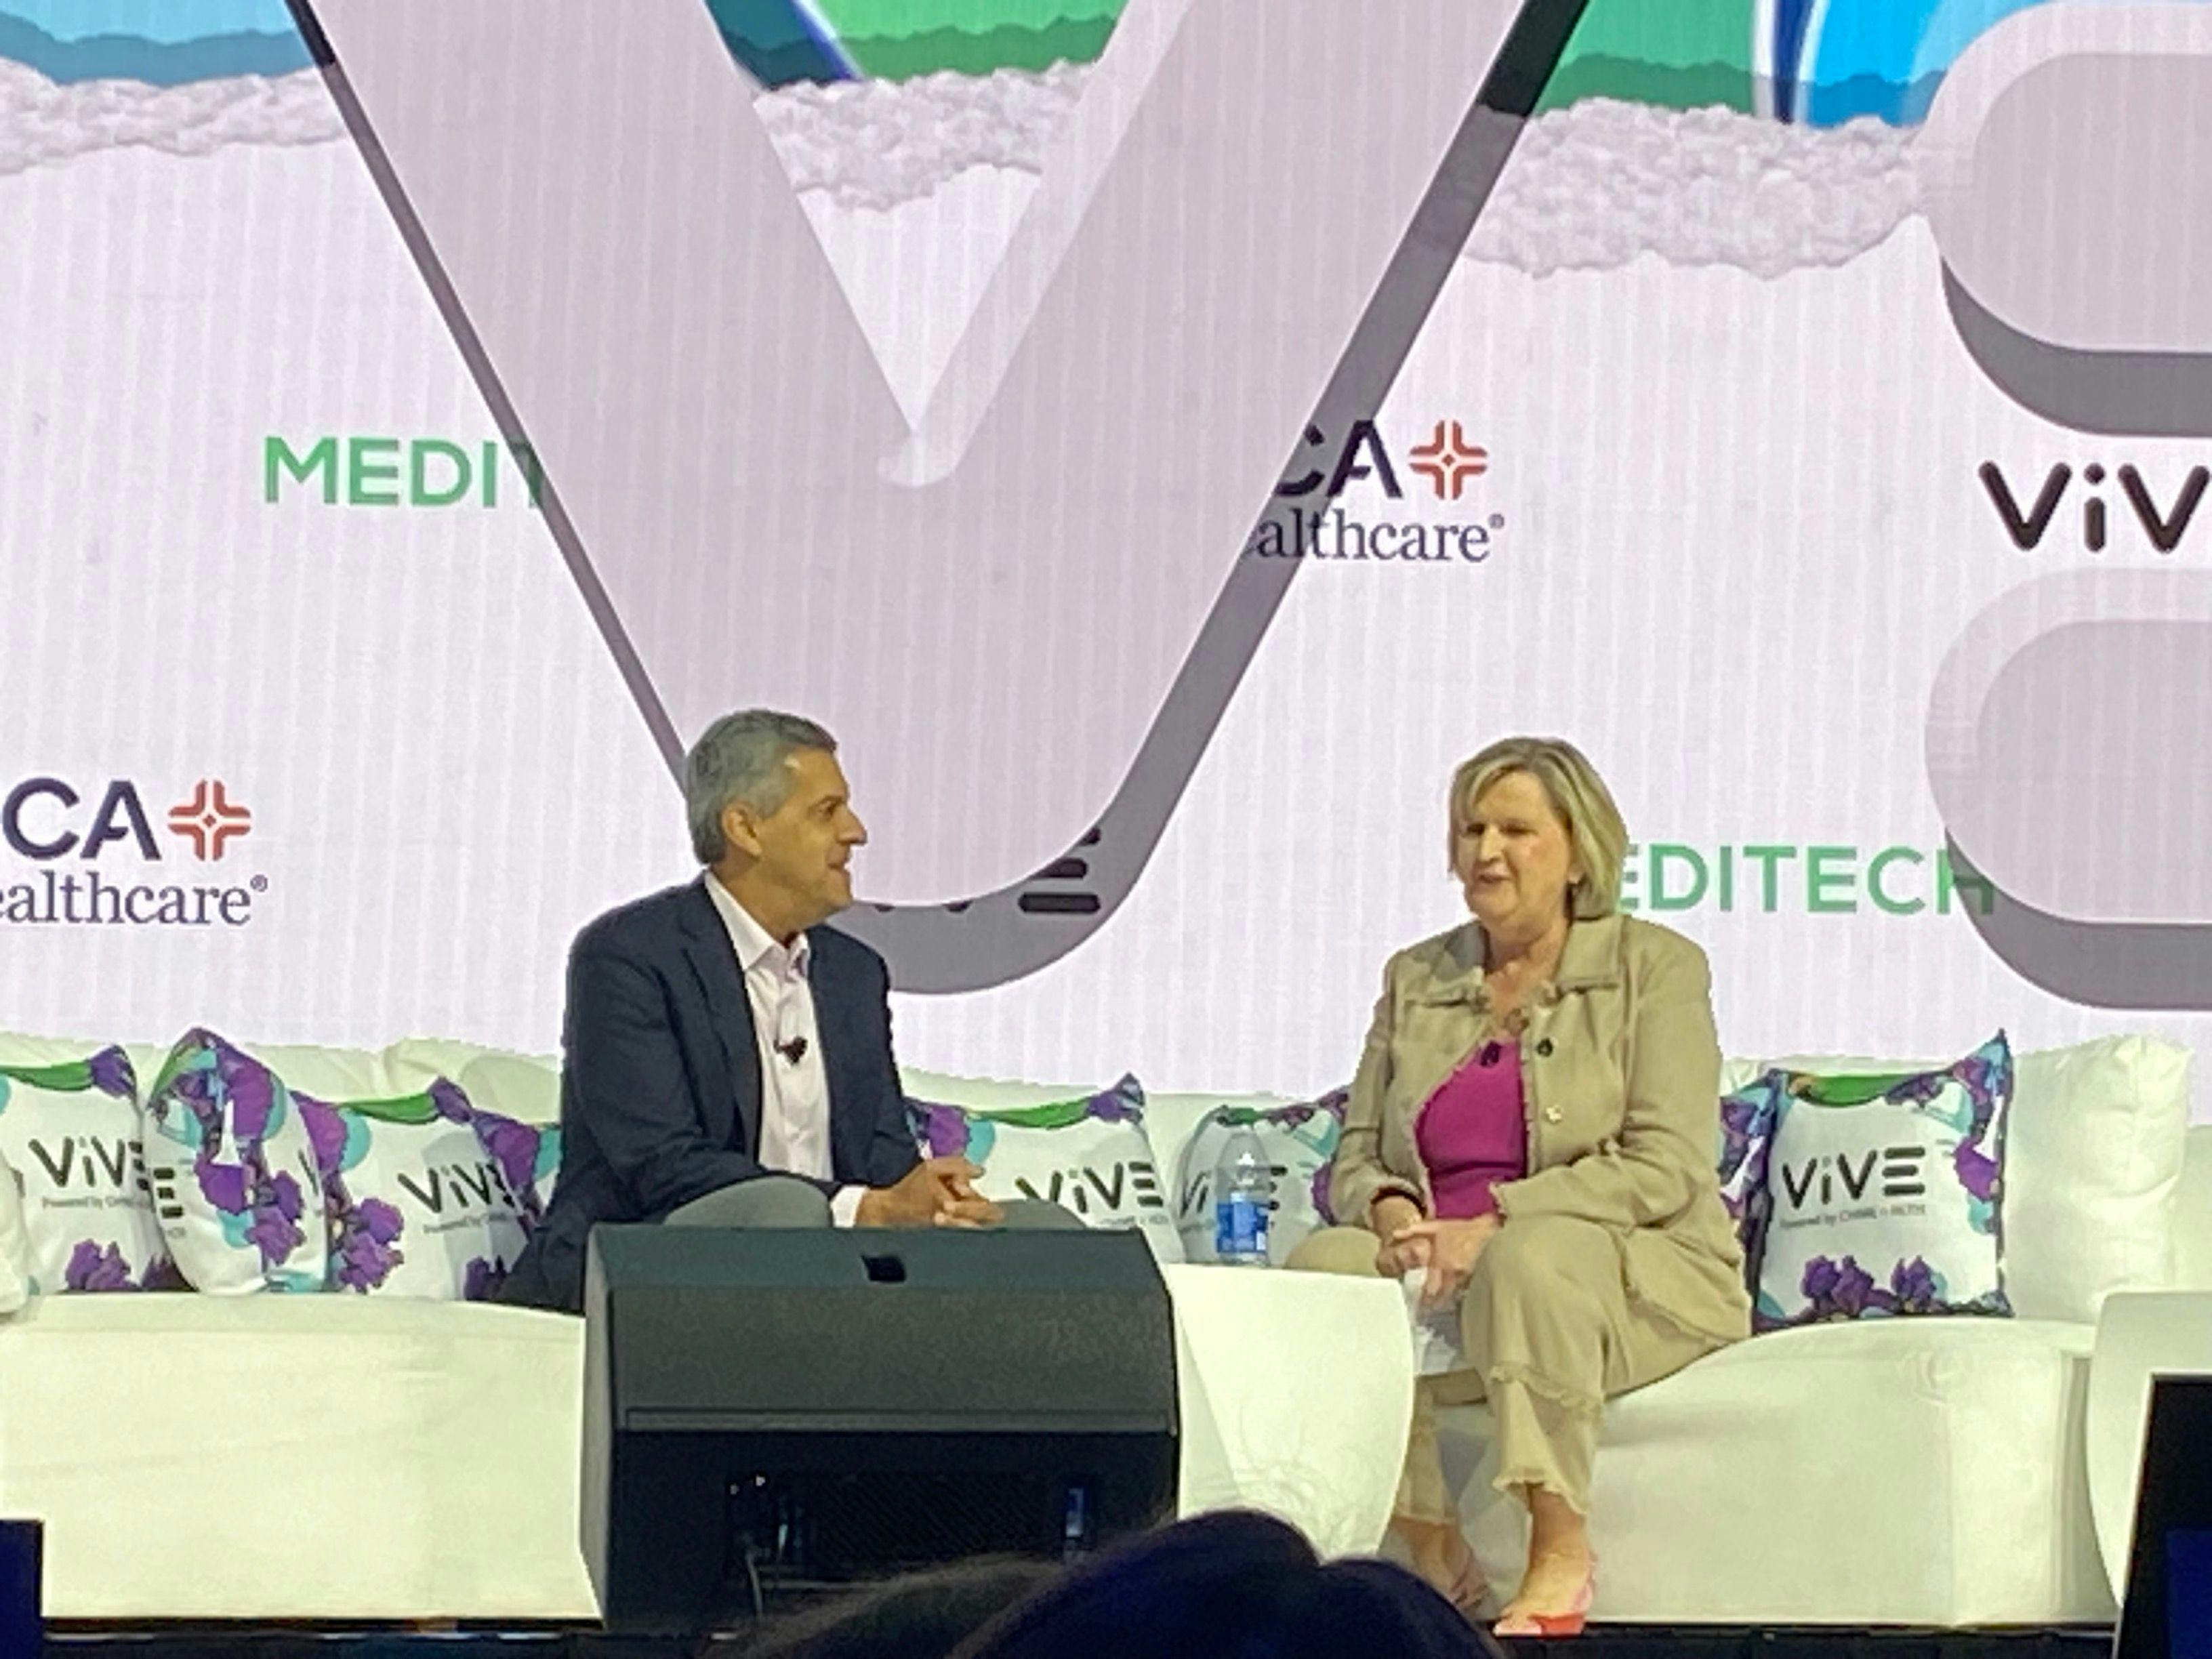 HCA Healthcare CEO Sam Hazen talks with Helen Waters, COO of MEDITECH, at the ViVE Conference March 28. (Photo: Ron Southwick)